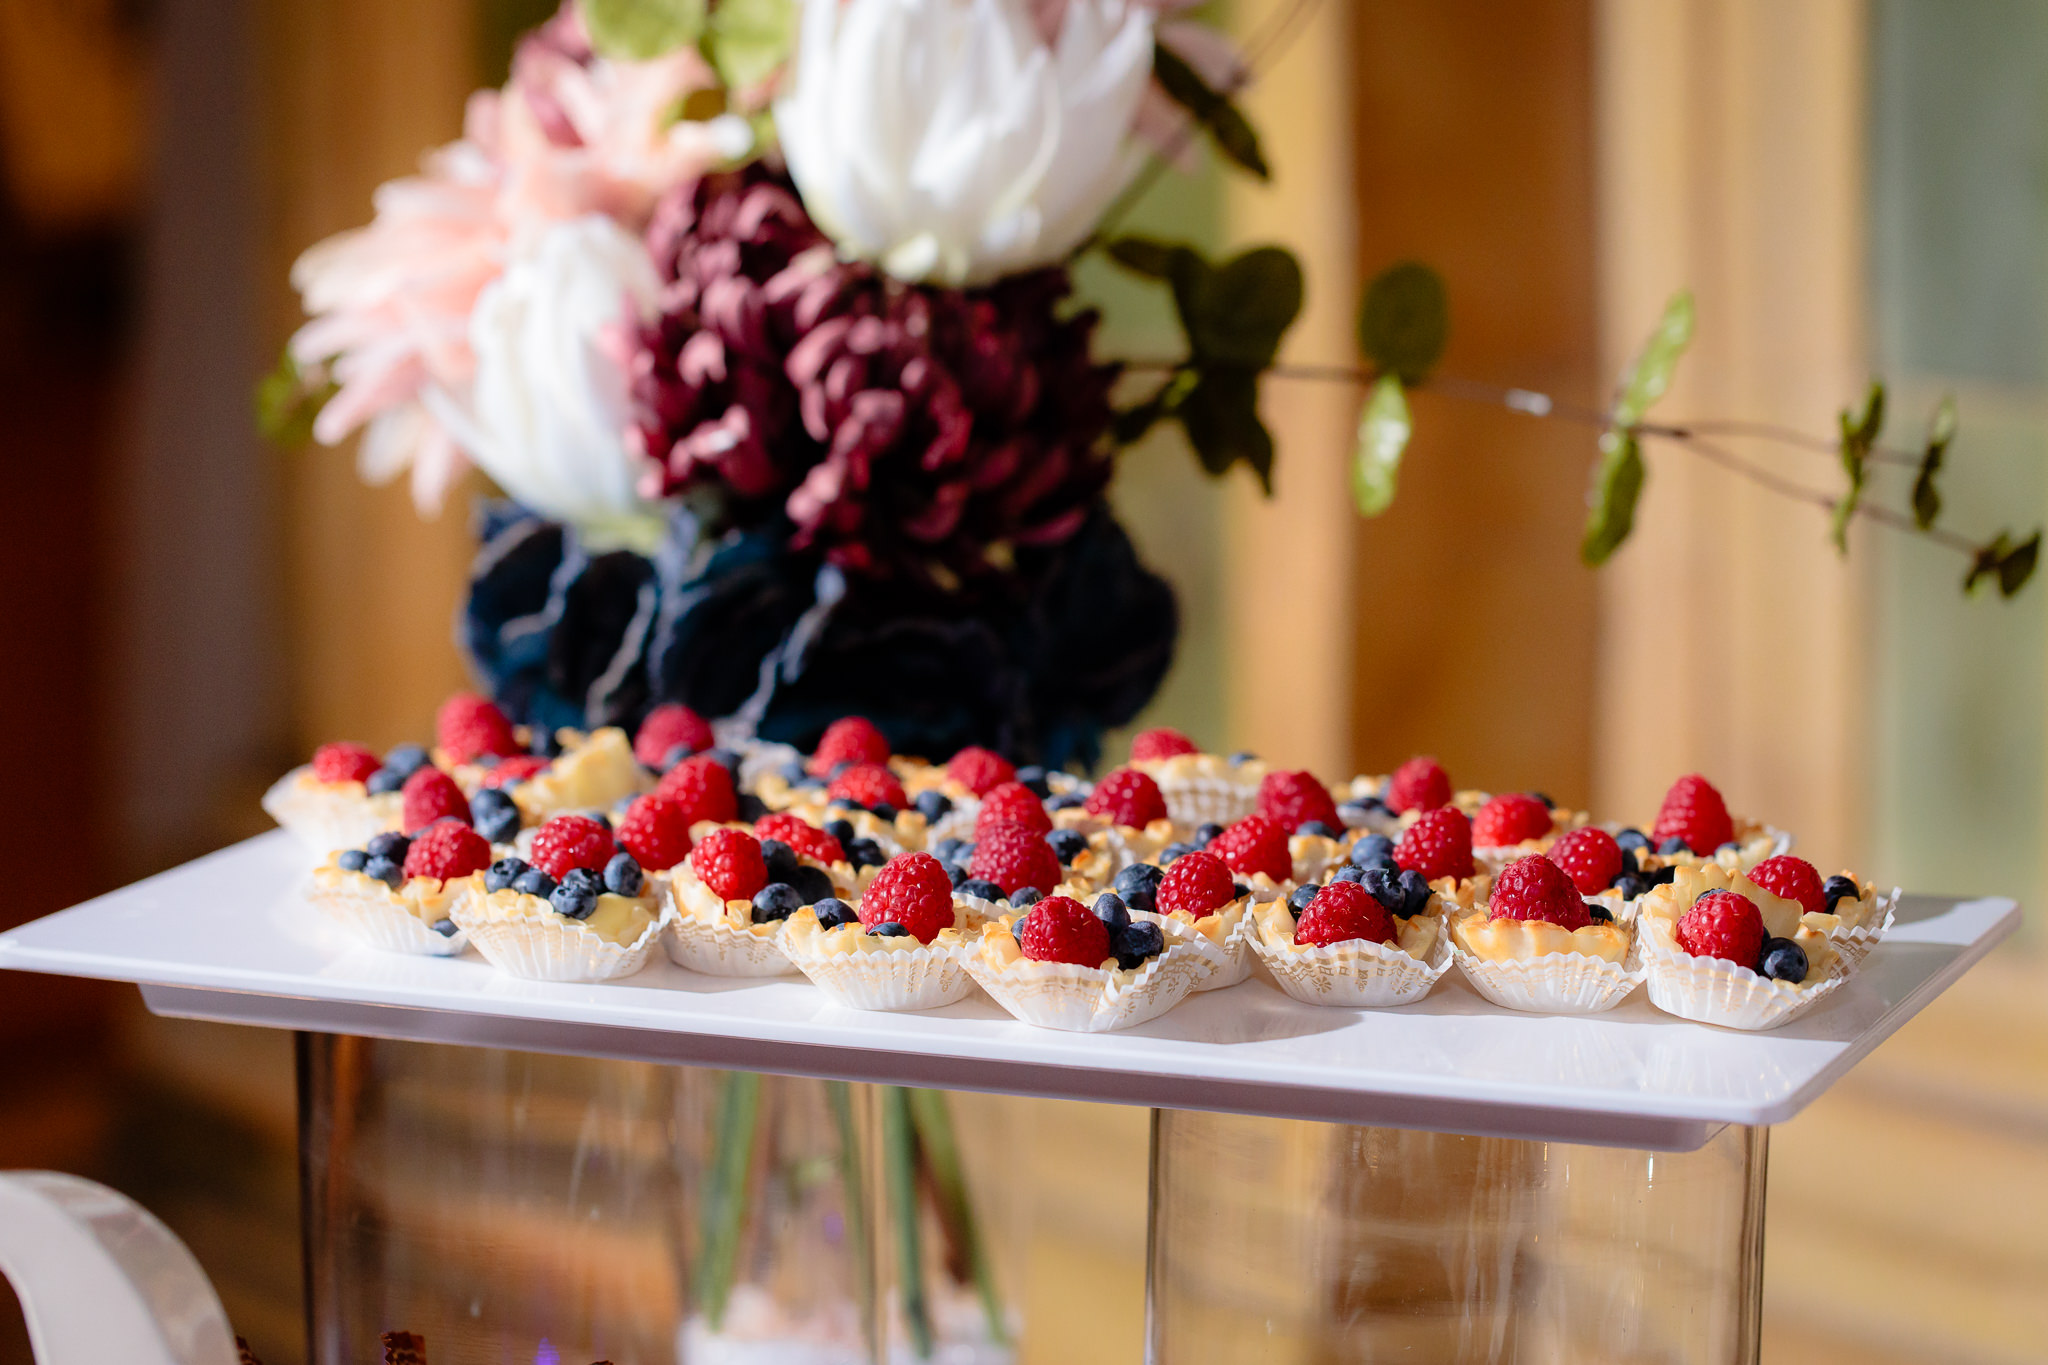 Berry tarts as part of a cookie table done by Rania's Catering at the Pennsylvanian